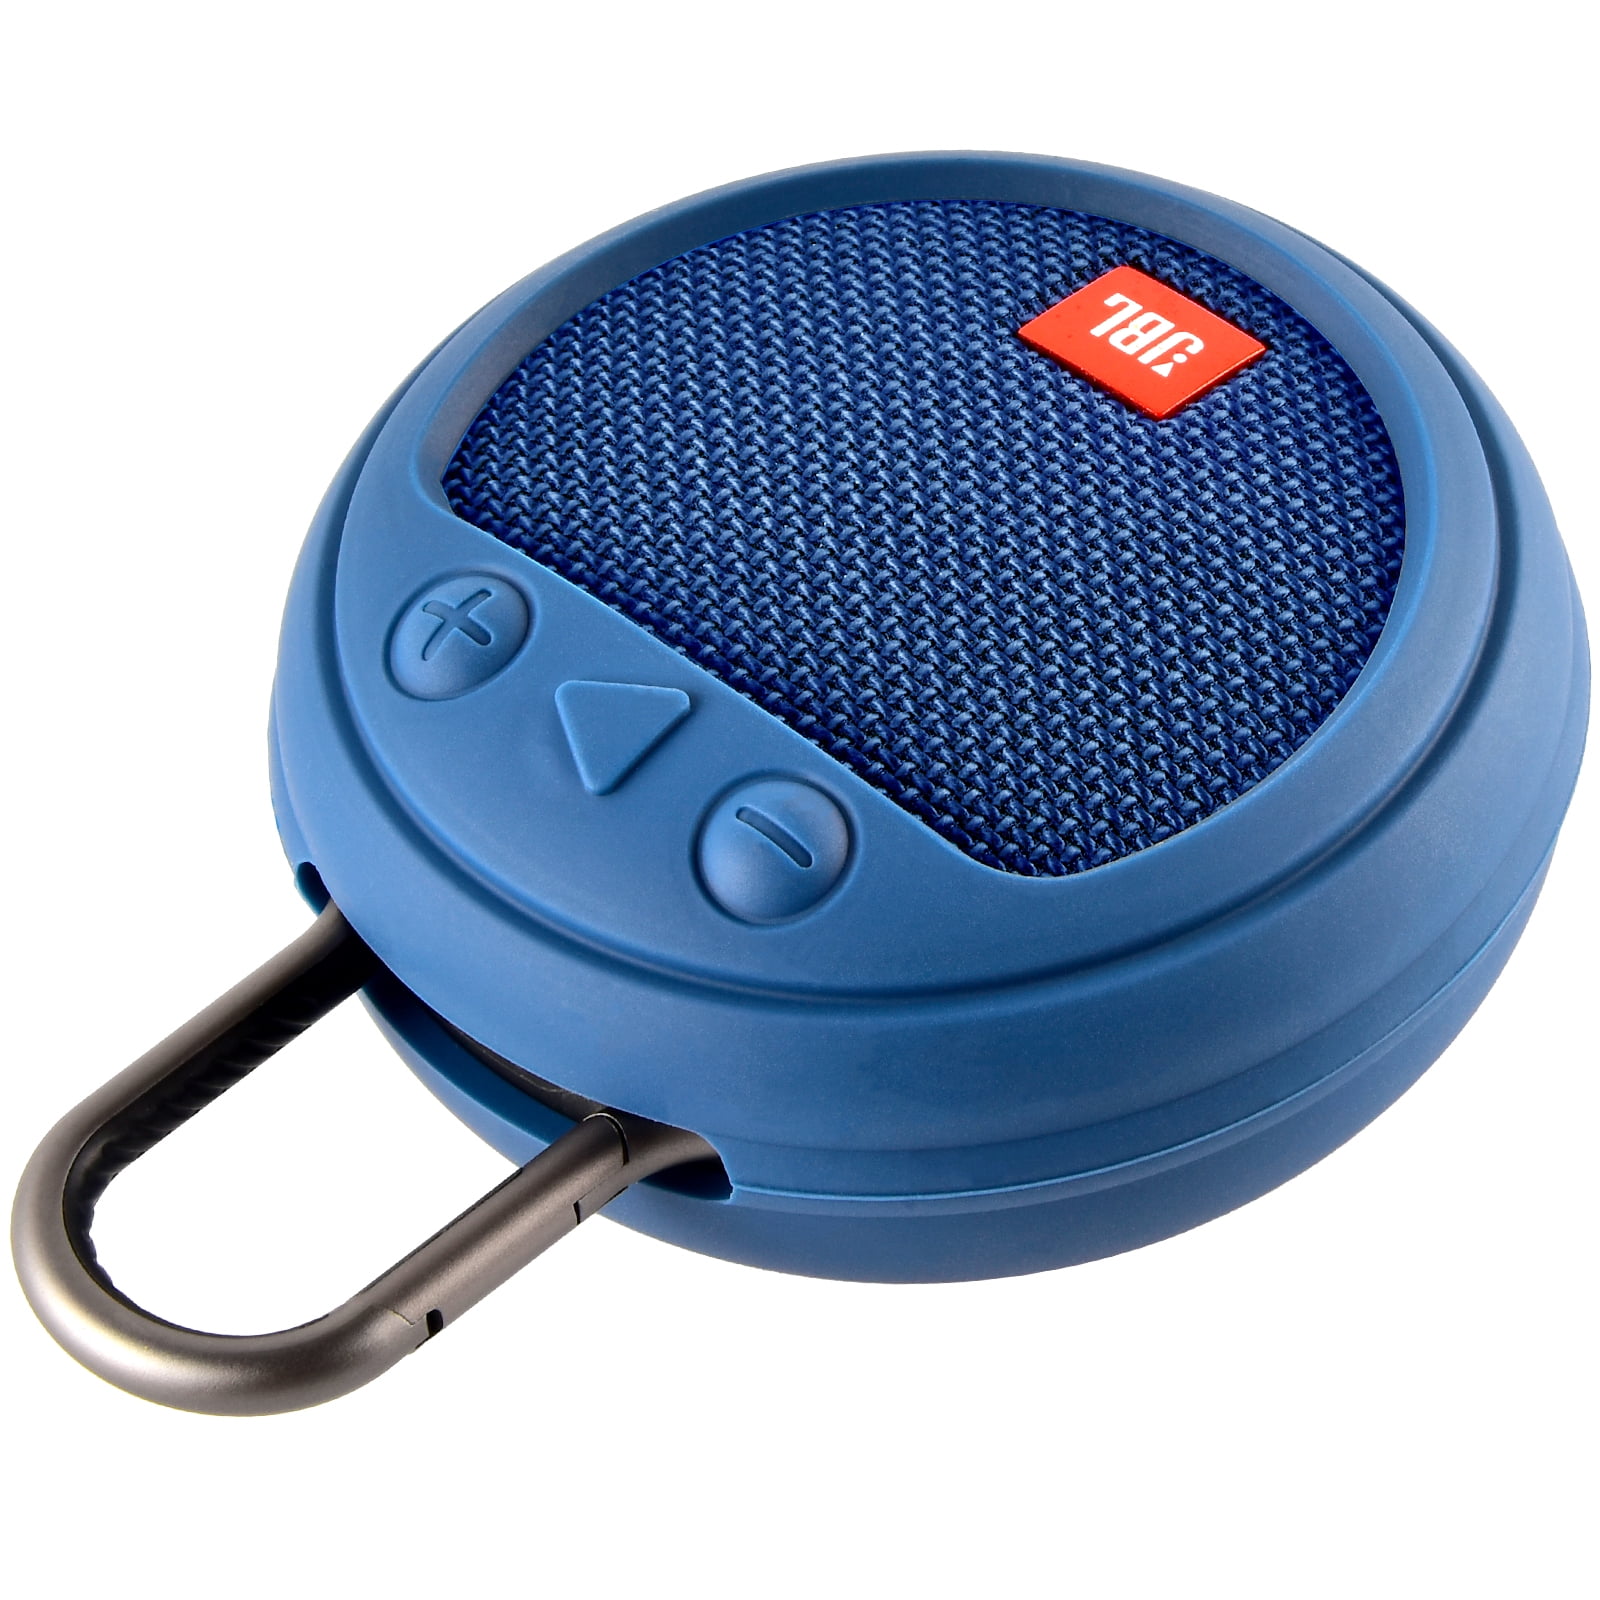 Silicone Case for JBL Clip 3 Waterproof Portable Bluetooth Speaker, Travel Carrying Protective Gel Soft Skin Cover for JBL 3 Wireless Speakers -Blue (Speaker not Included) - Walmart.com